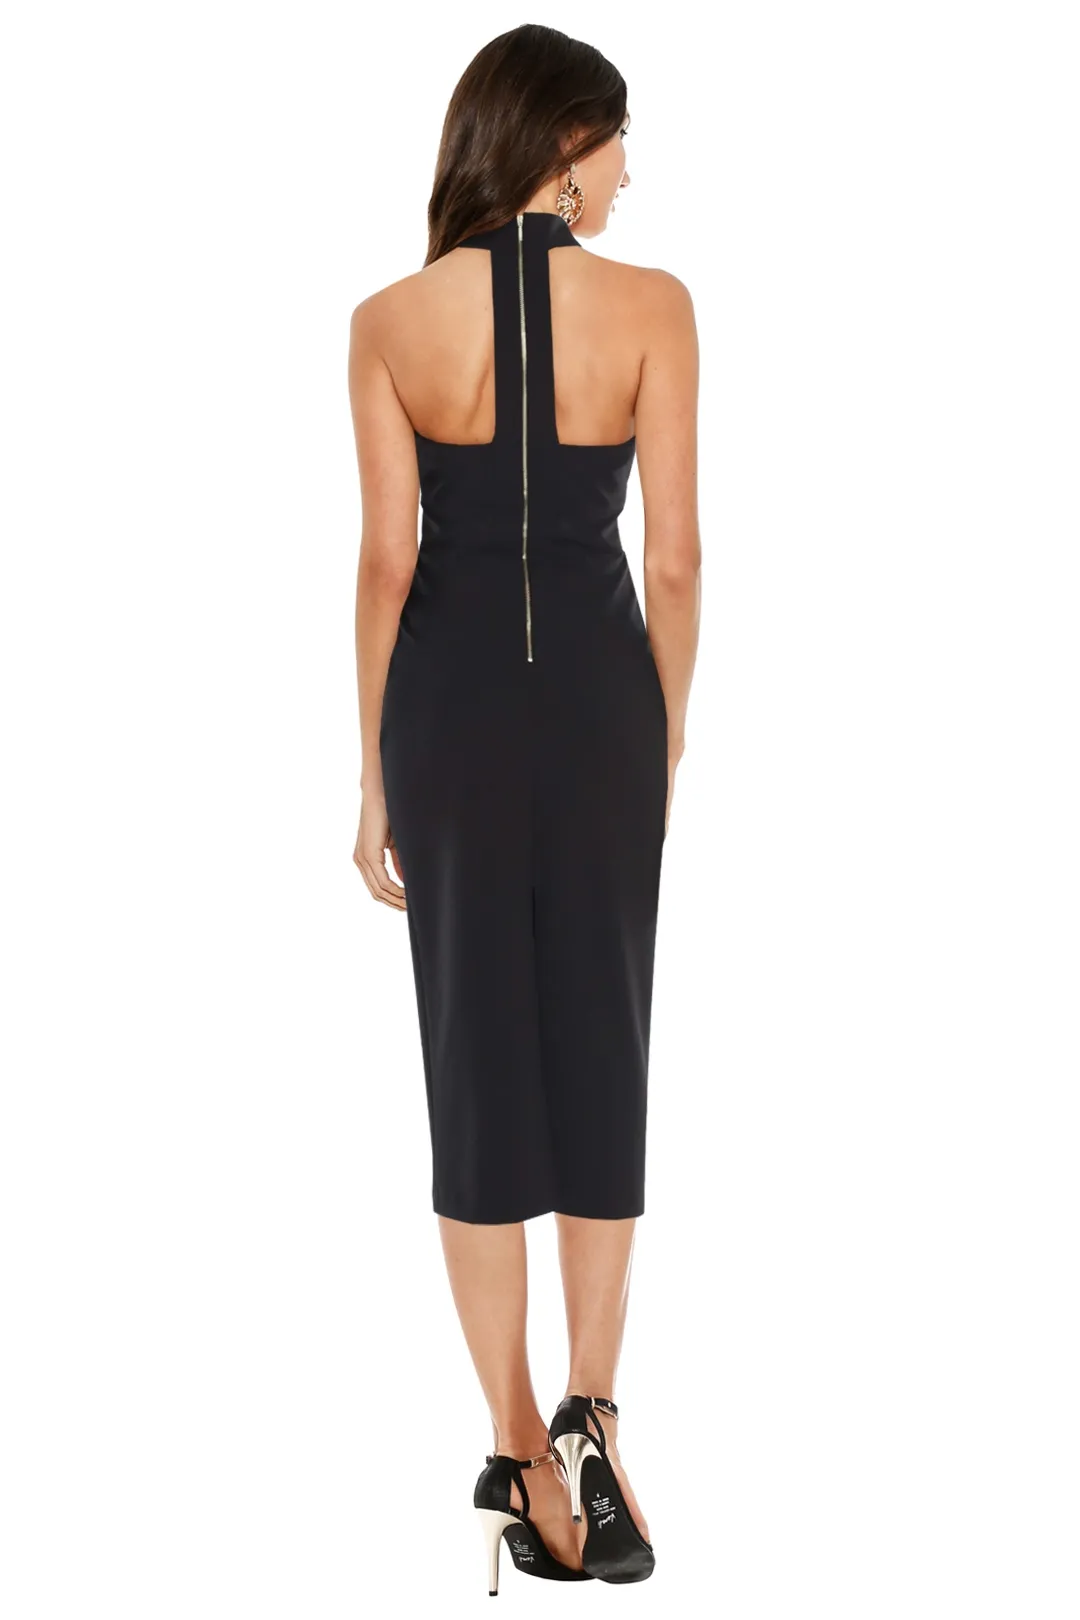 Rent the Olivia Cocktail Dress for a birthday celebration